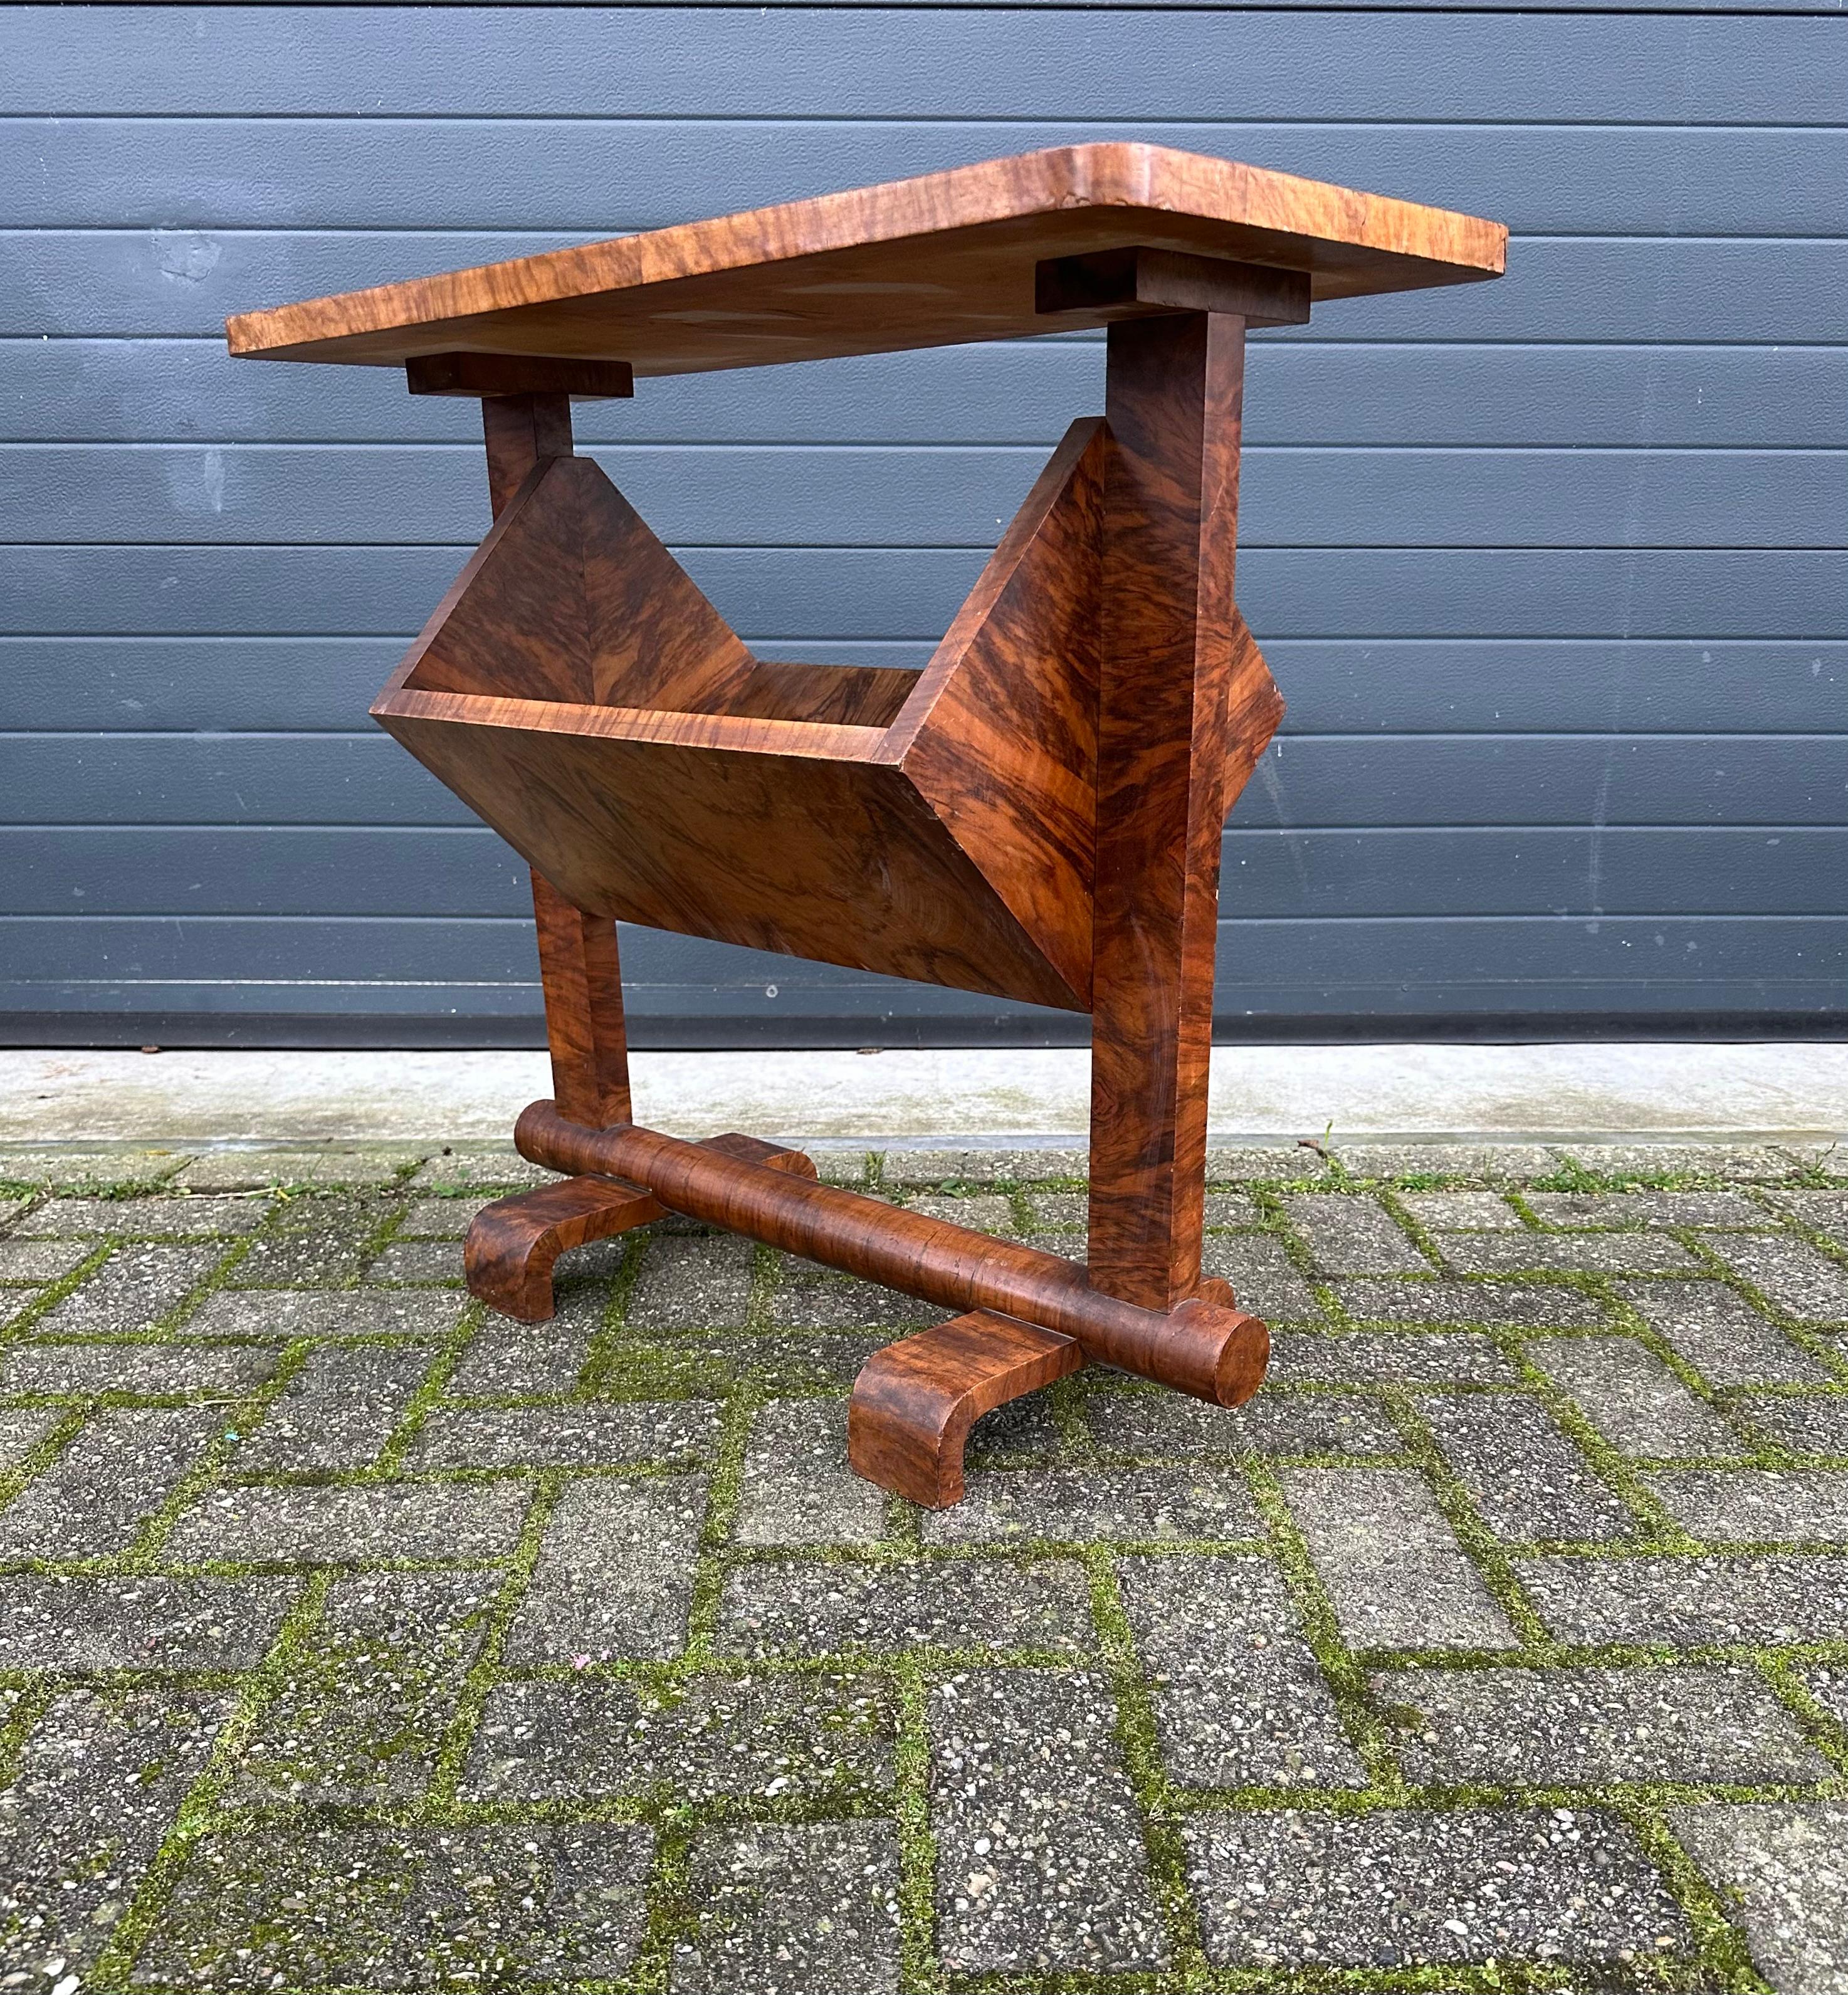 Hand-Crafted Rare & Practical Art Deco Burl Walnut Wood End or Side Table / Book Trough 1920